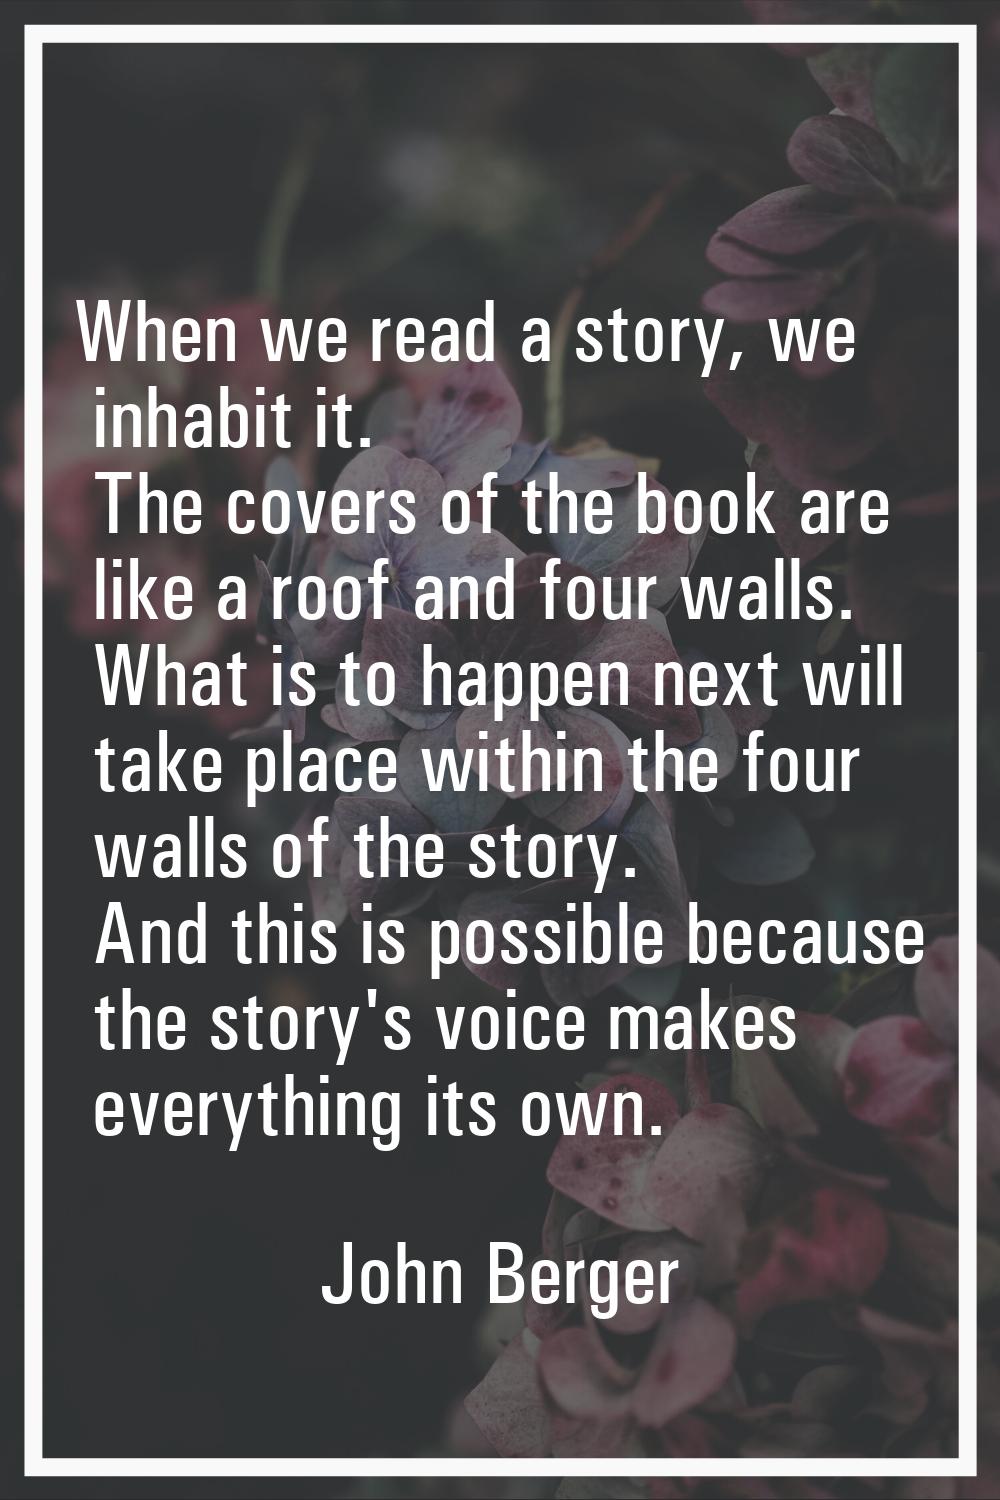 When we read a story, we inhabit it. The covers of the book are like a roof and four walls. What is